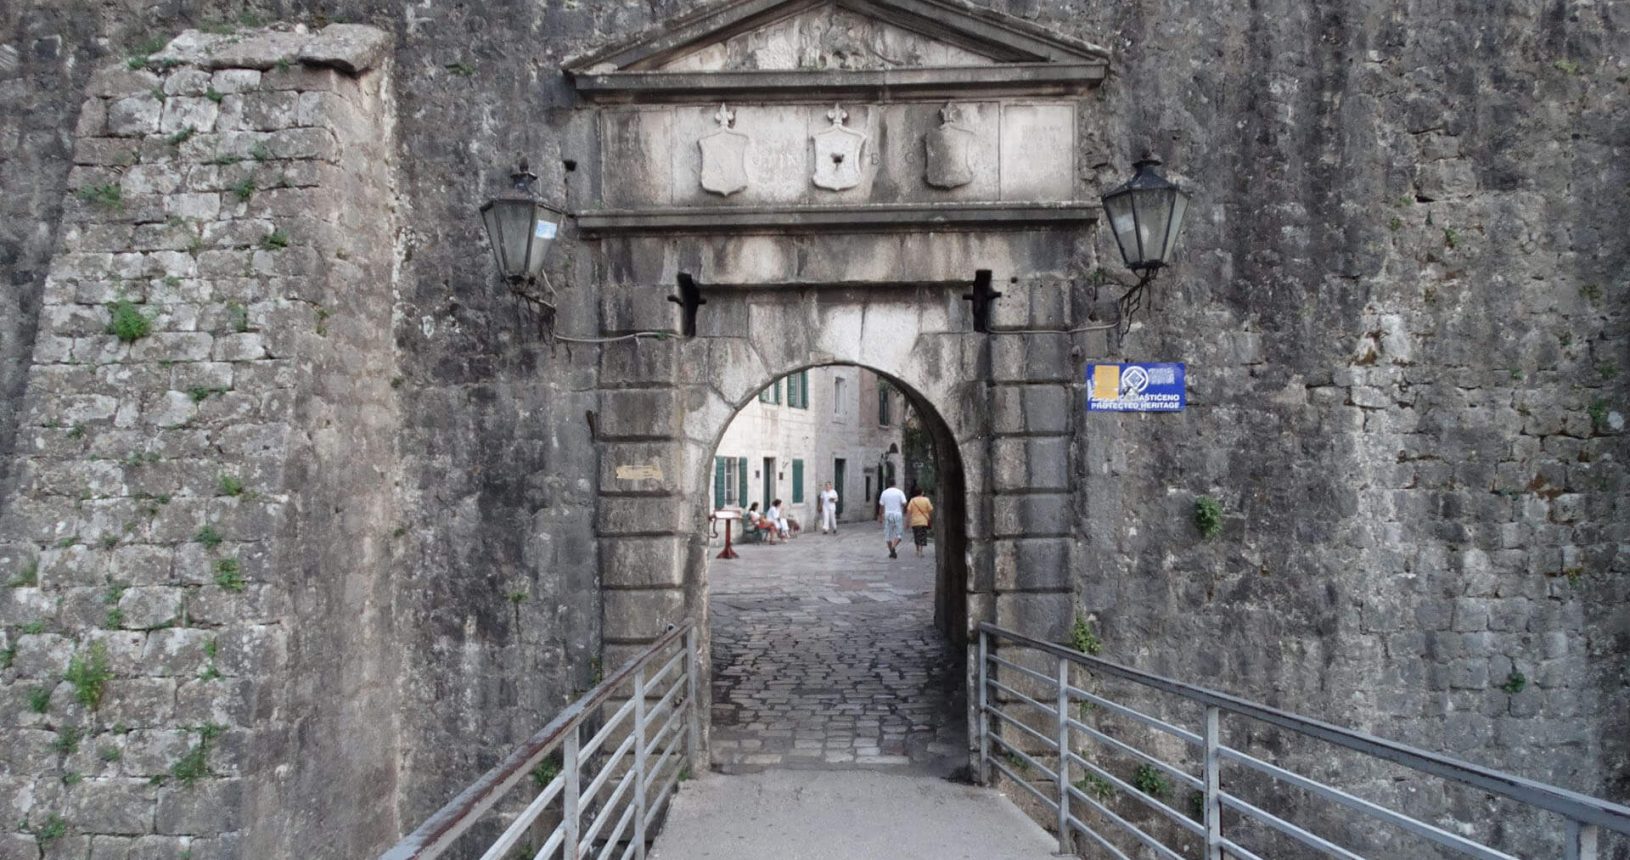 The entrace to Old Town of Kotor through the bridge